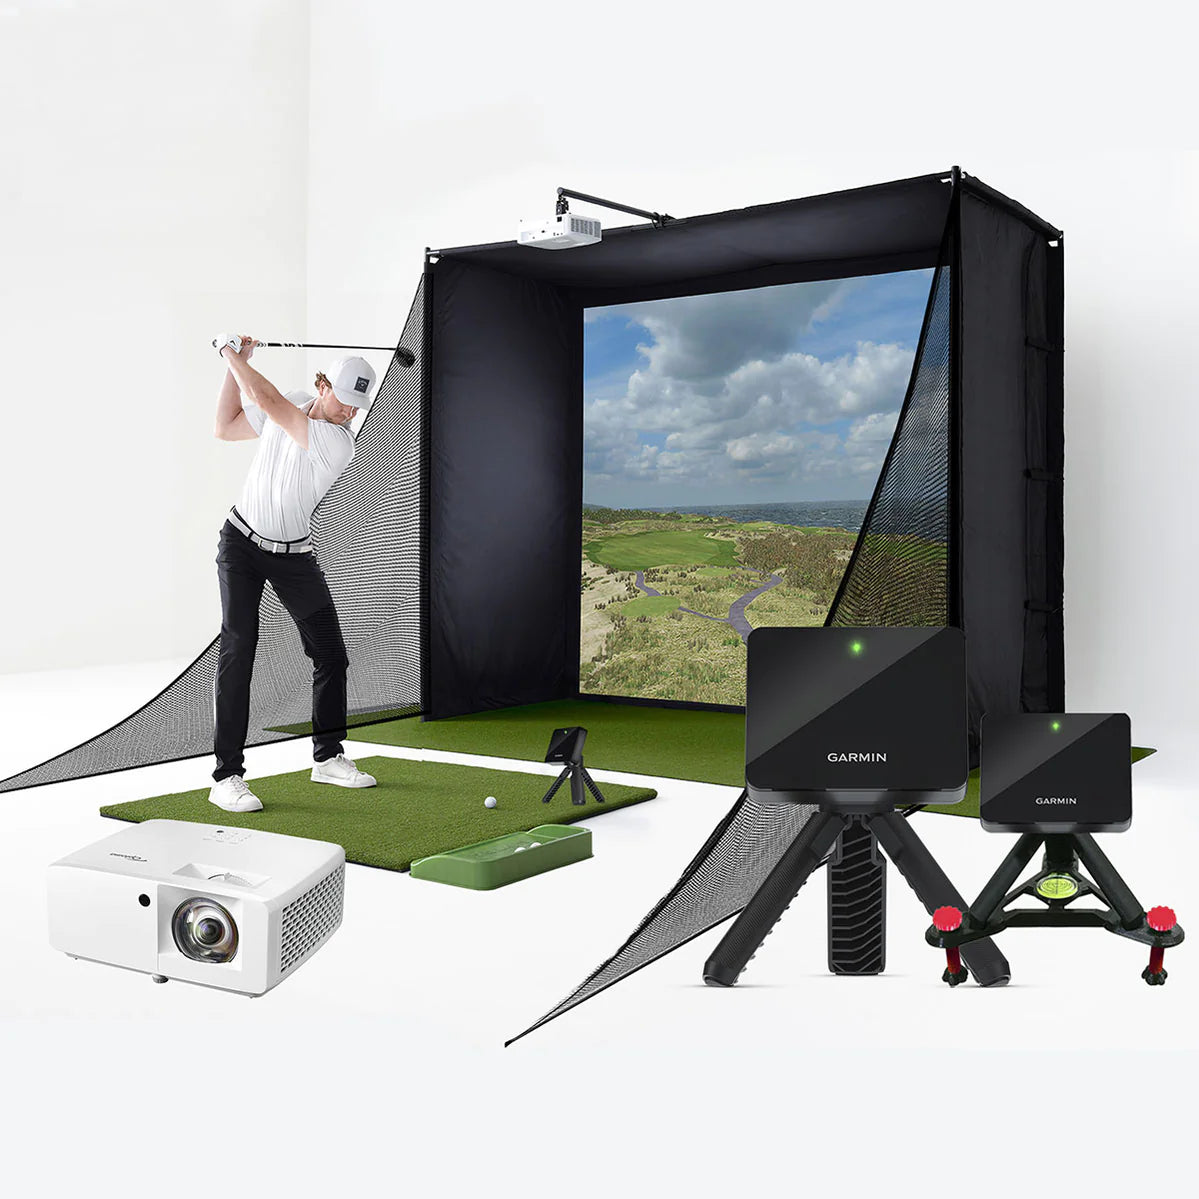 A golfer getting ready to swing in a golf simulator with an Approach R10 with a projector , R10 unit, and R10 unit on alignment stand in the foreground